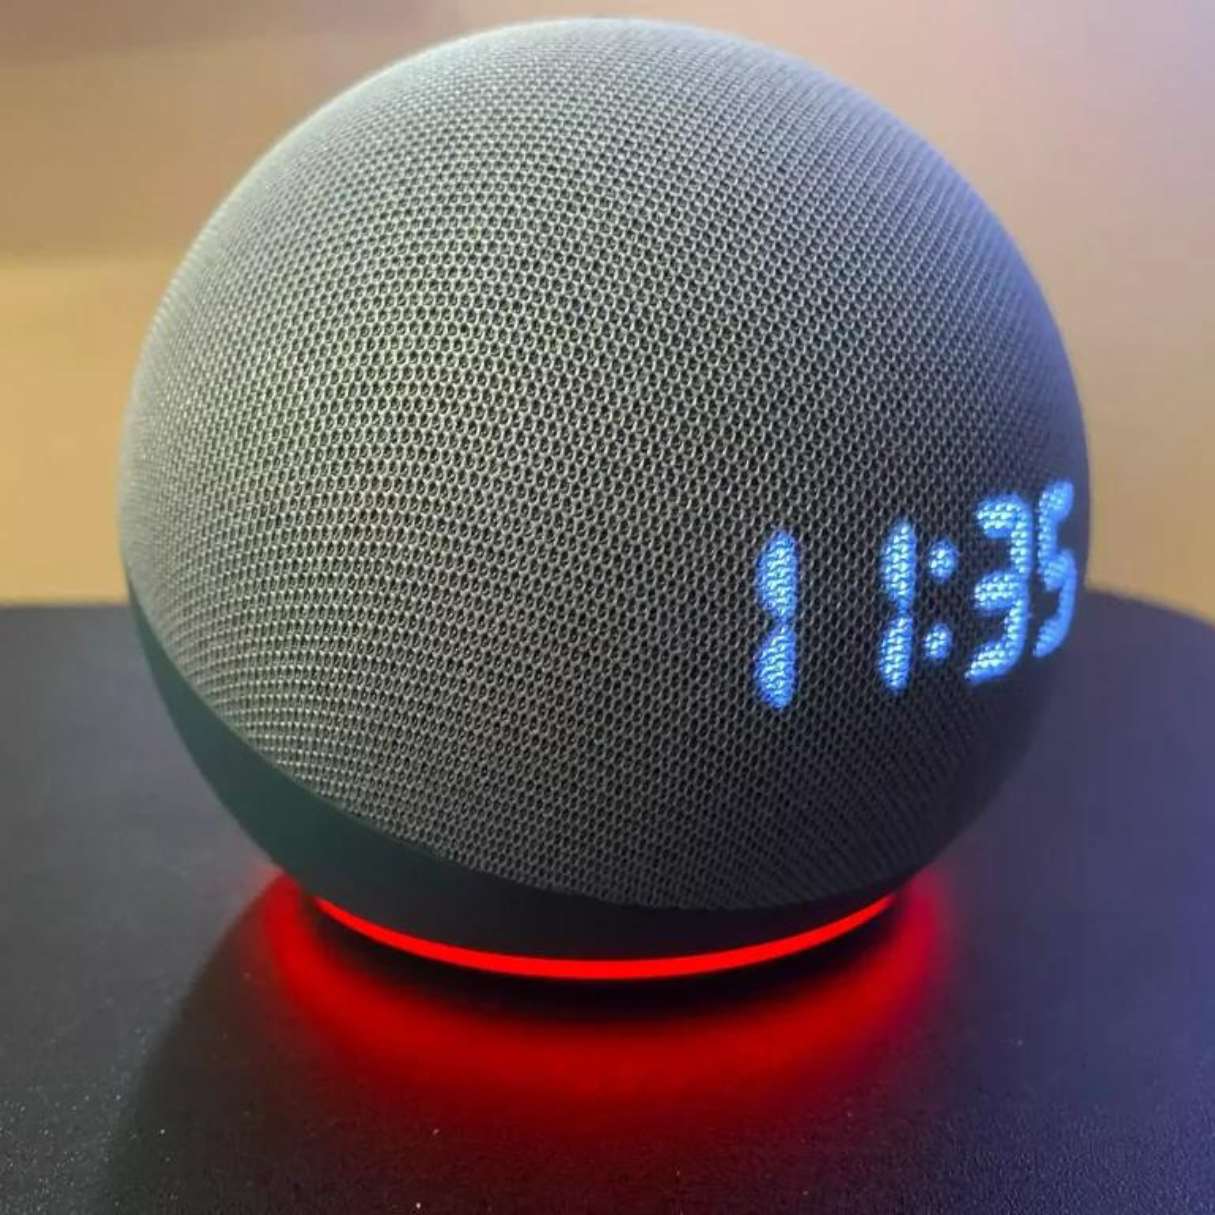 What To Do When Alexa Turns Red